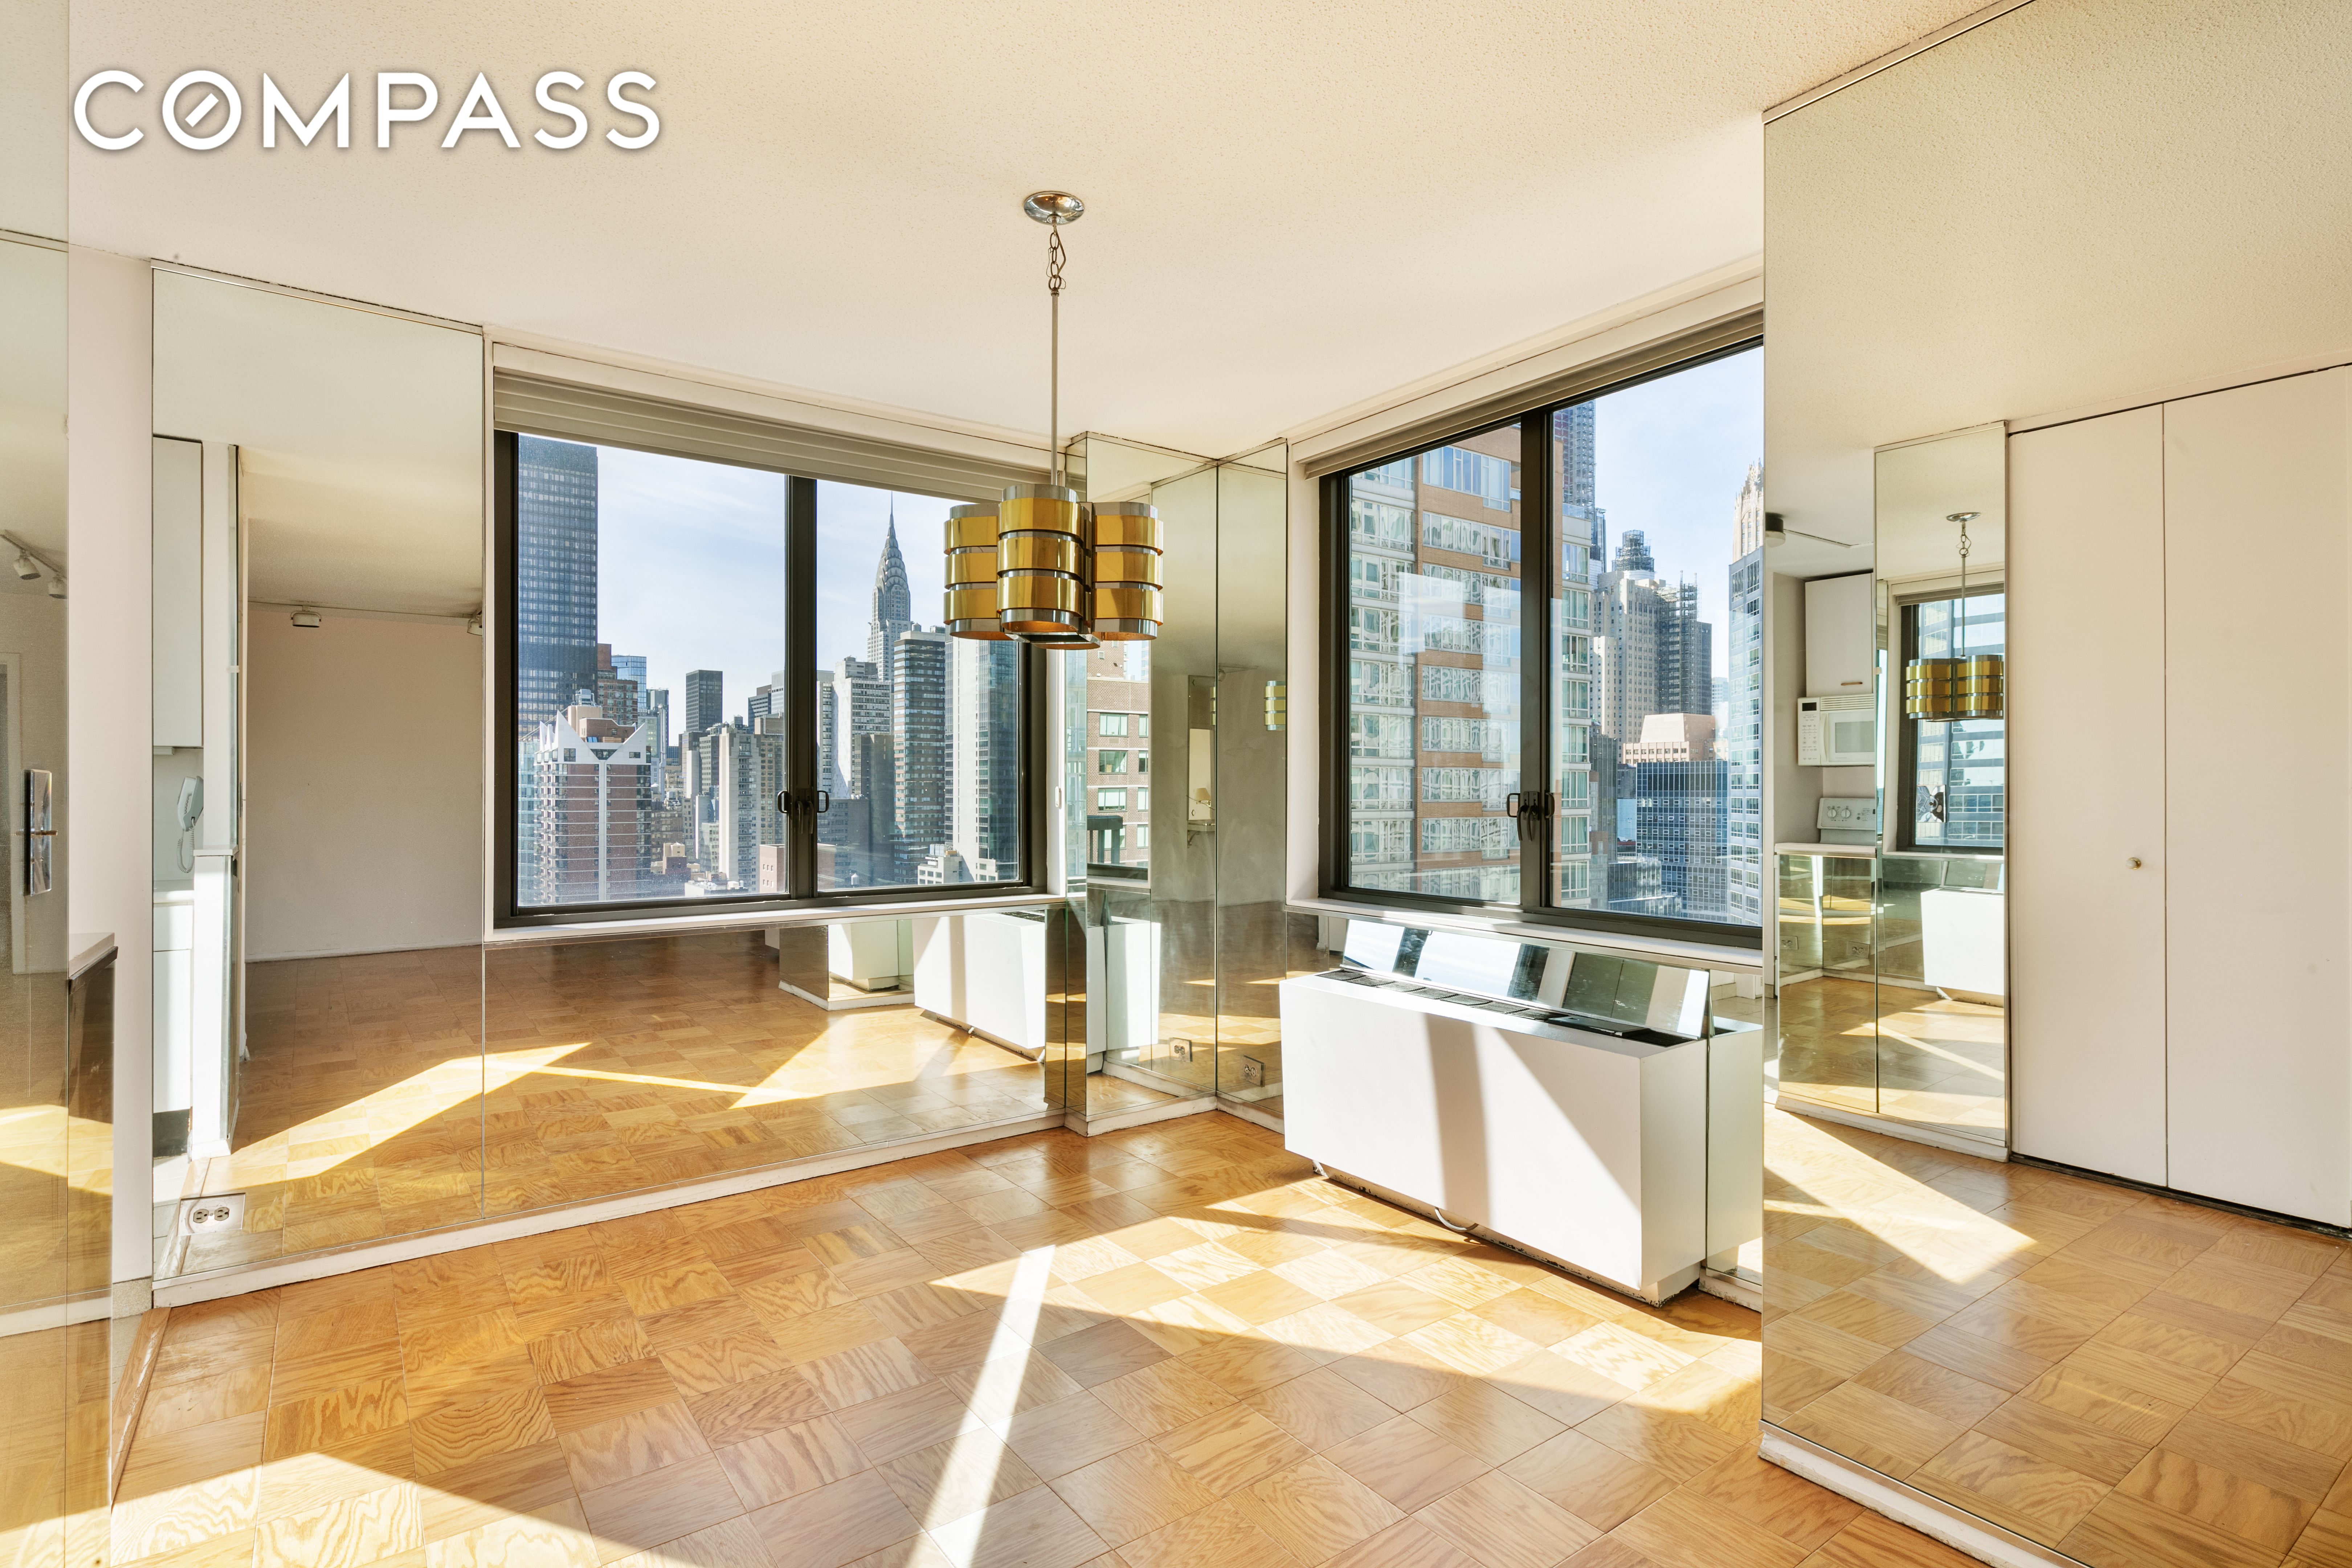 300 East 54th Street 28De, Sutton Place, Midtown East, NYC - 2 Bedrooms  
2.5 Bathrooms  
5 Rooms - 